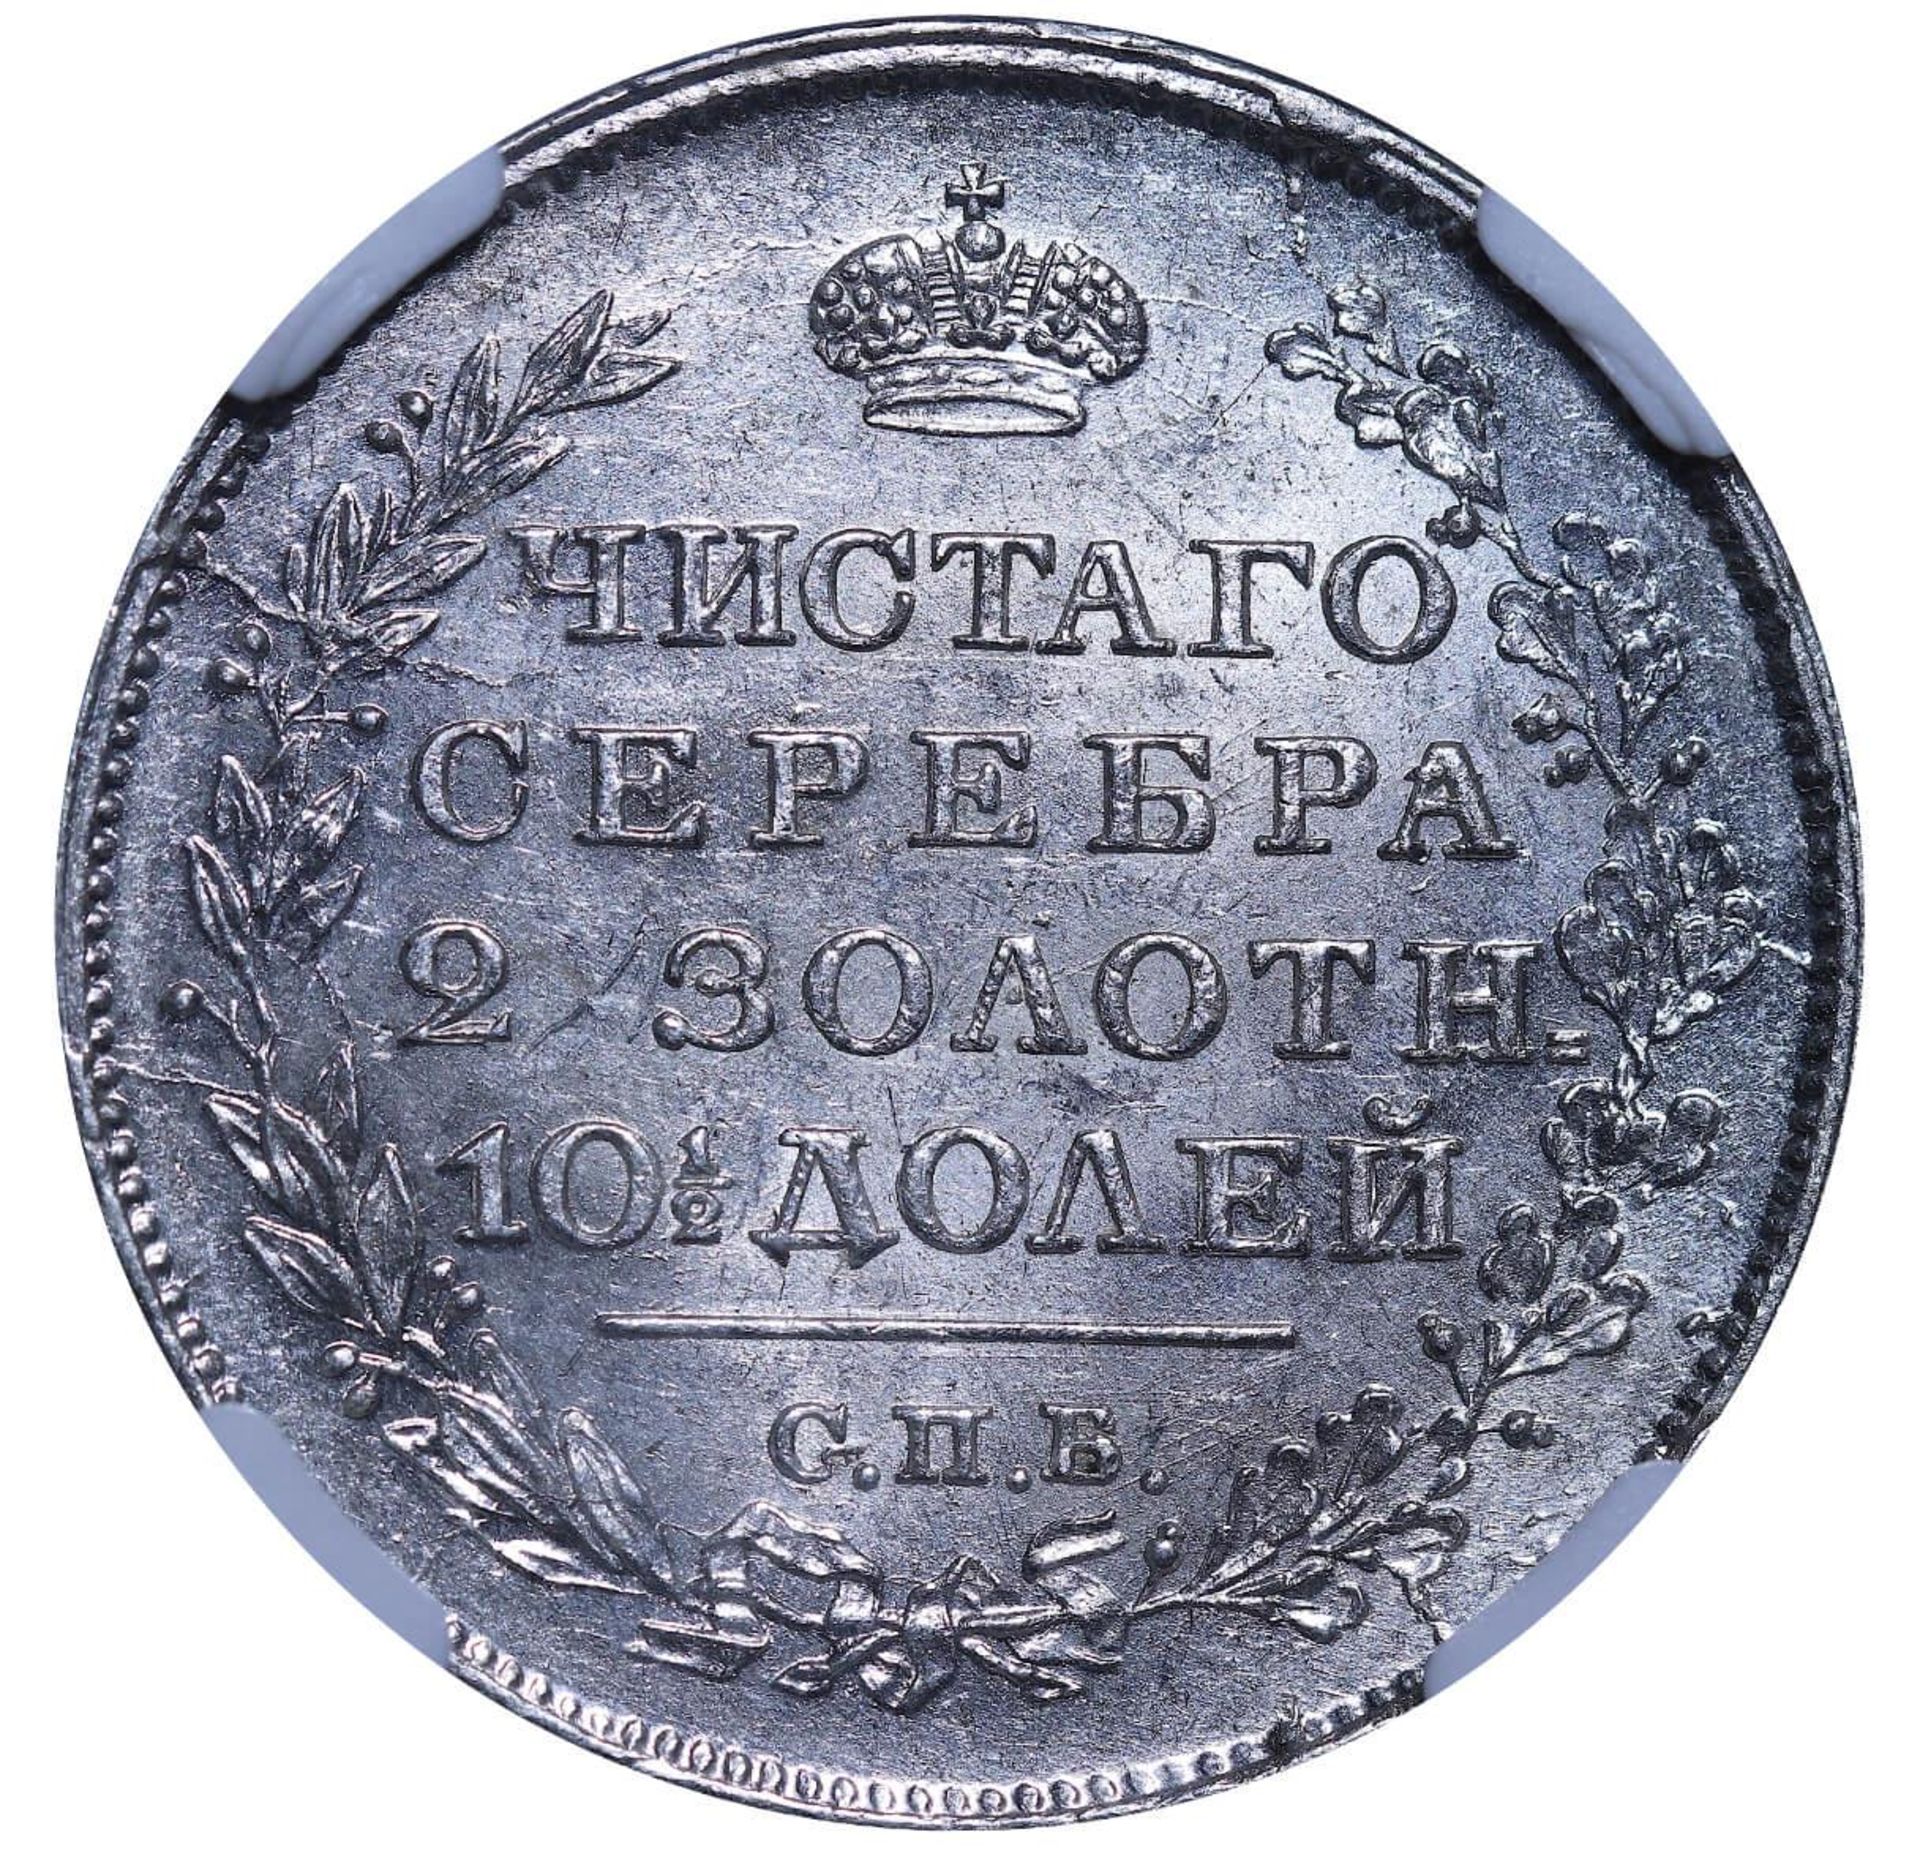 Russian Empire, 1 Poltina, 1819 year, SPB-PS, NGC, MS 62 - Image 3 of 3